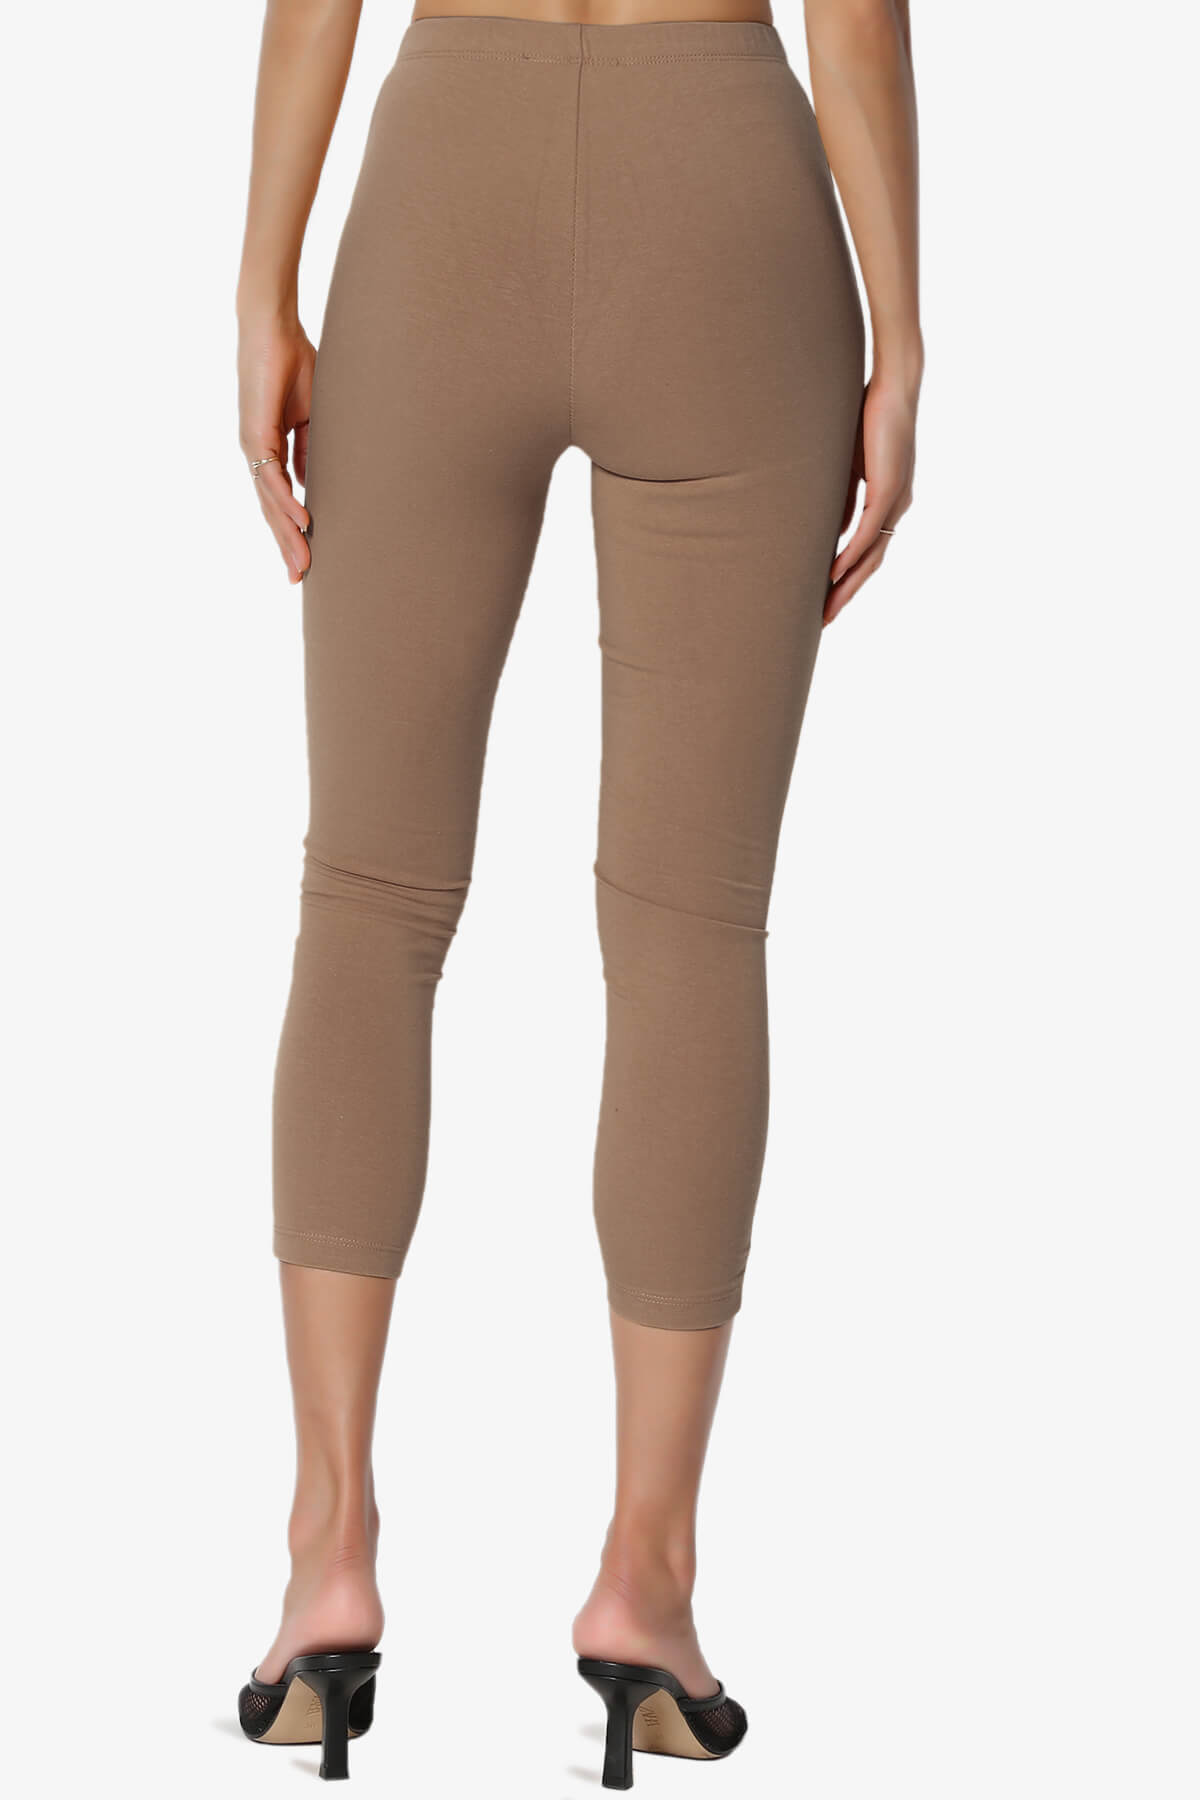 Load image into Gallery viewer, Ansley Luxe Cotton Capri Leggings MOCHA_2
